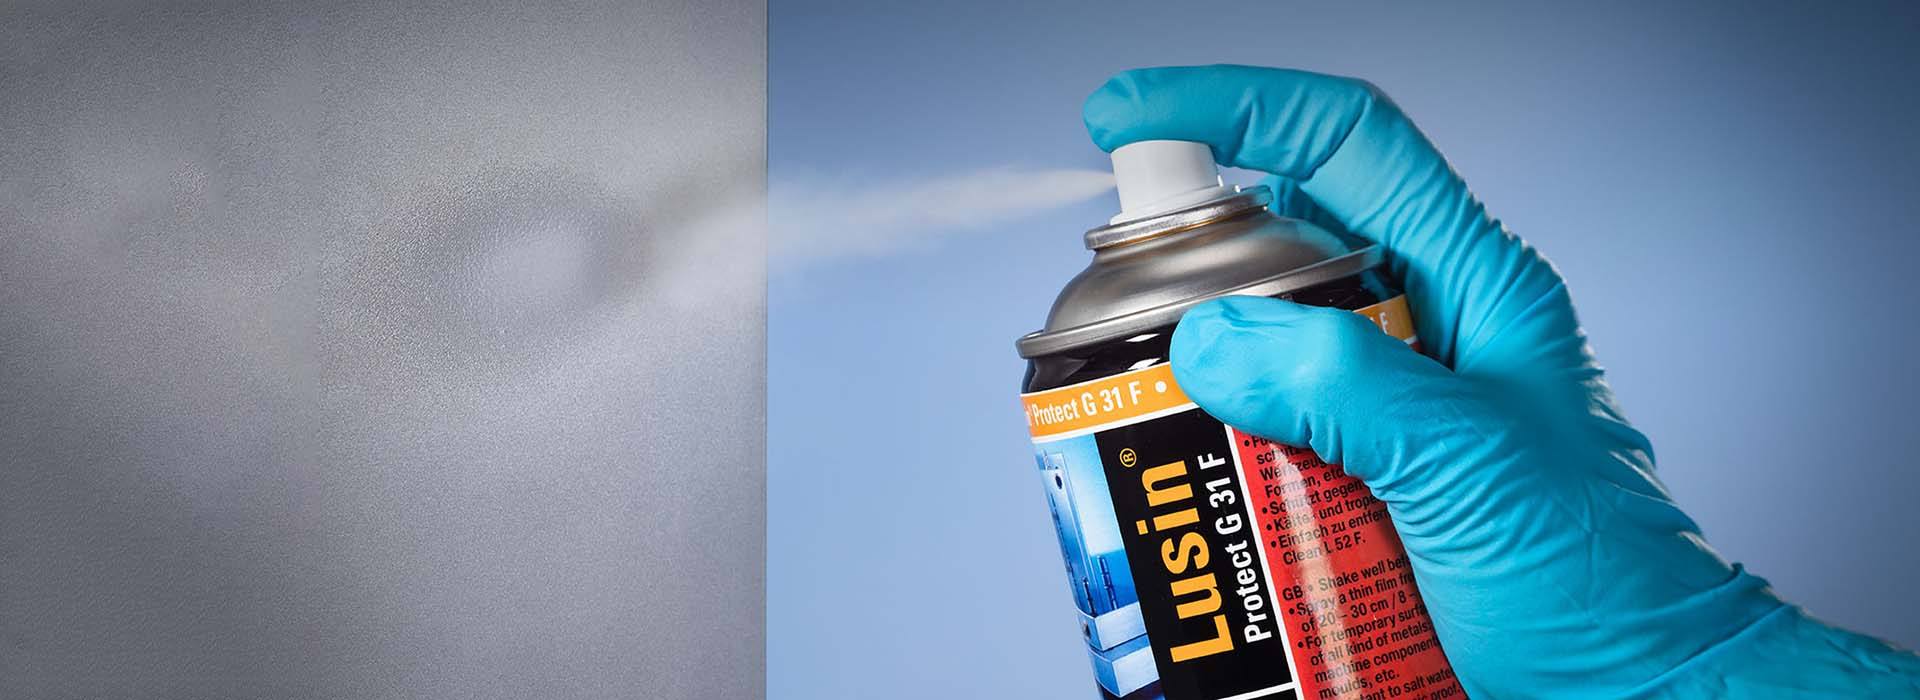 Lusin Protect G31F Anti-Corrosion Mould Protectant